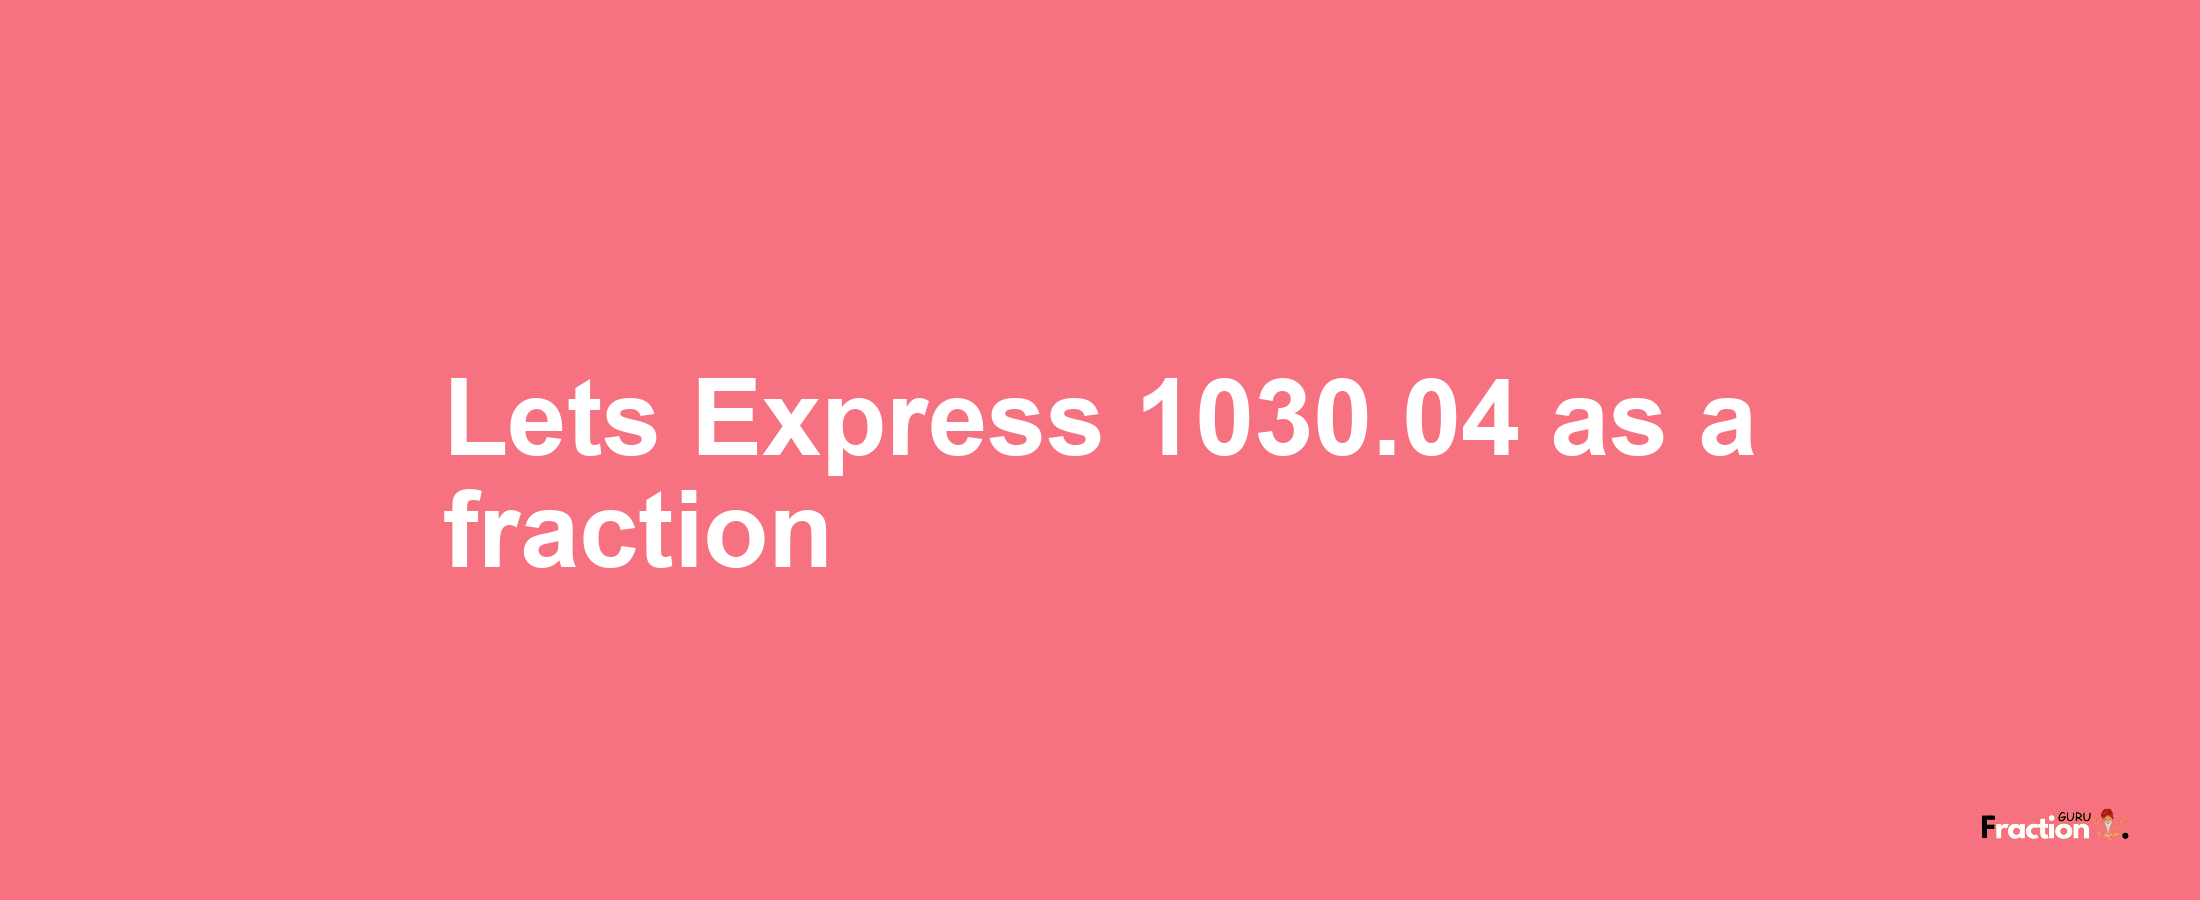 Lets Express 1030.04 as afraction